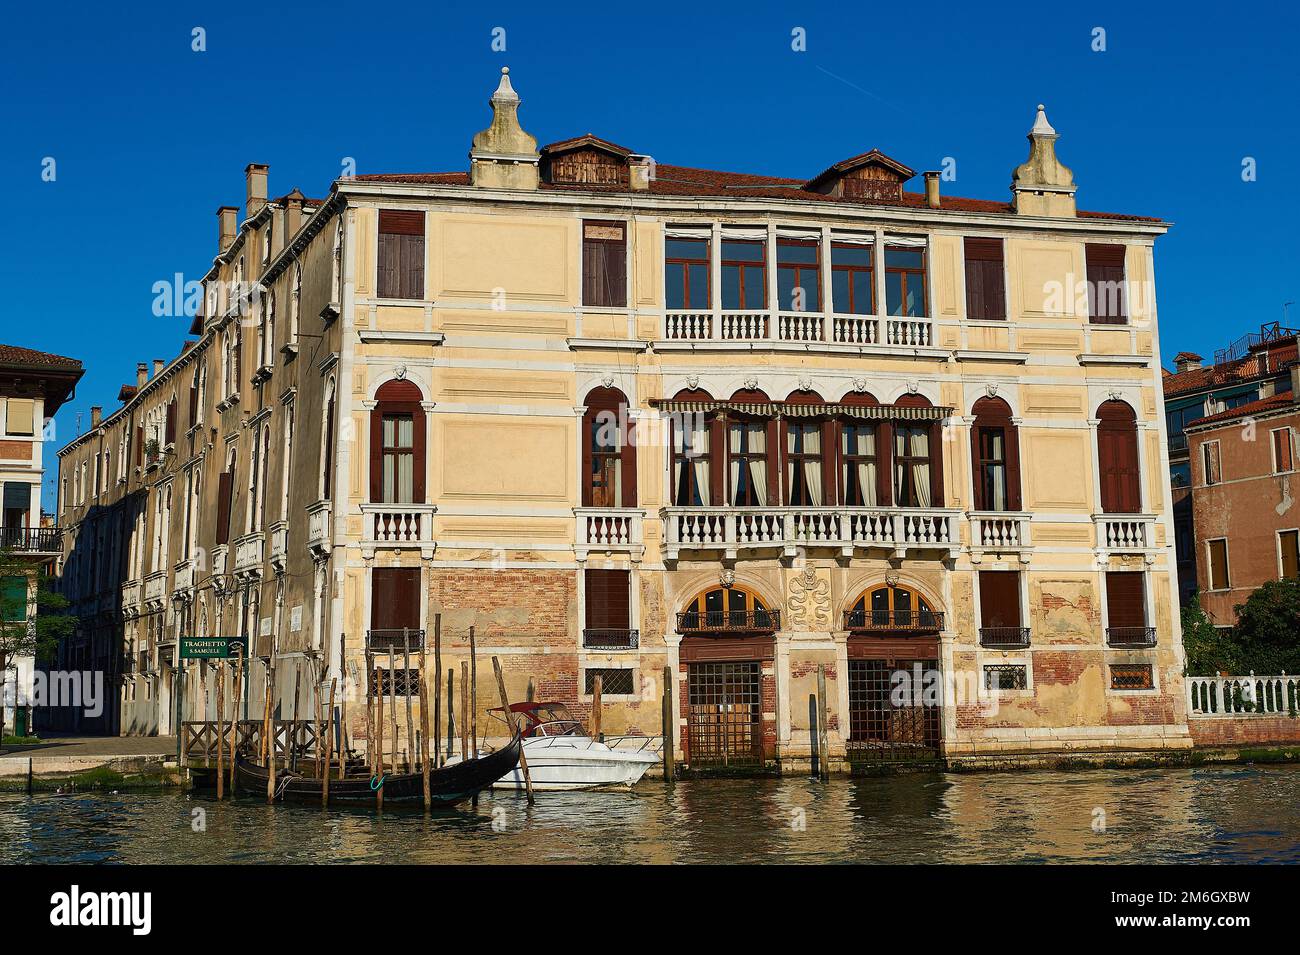 View of a typical Venetian facade with its façade damaged by the effect of water and a wooden pier for small boats Stock Photo